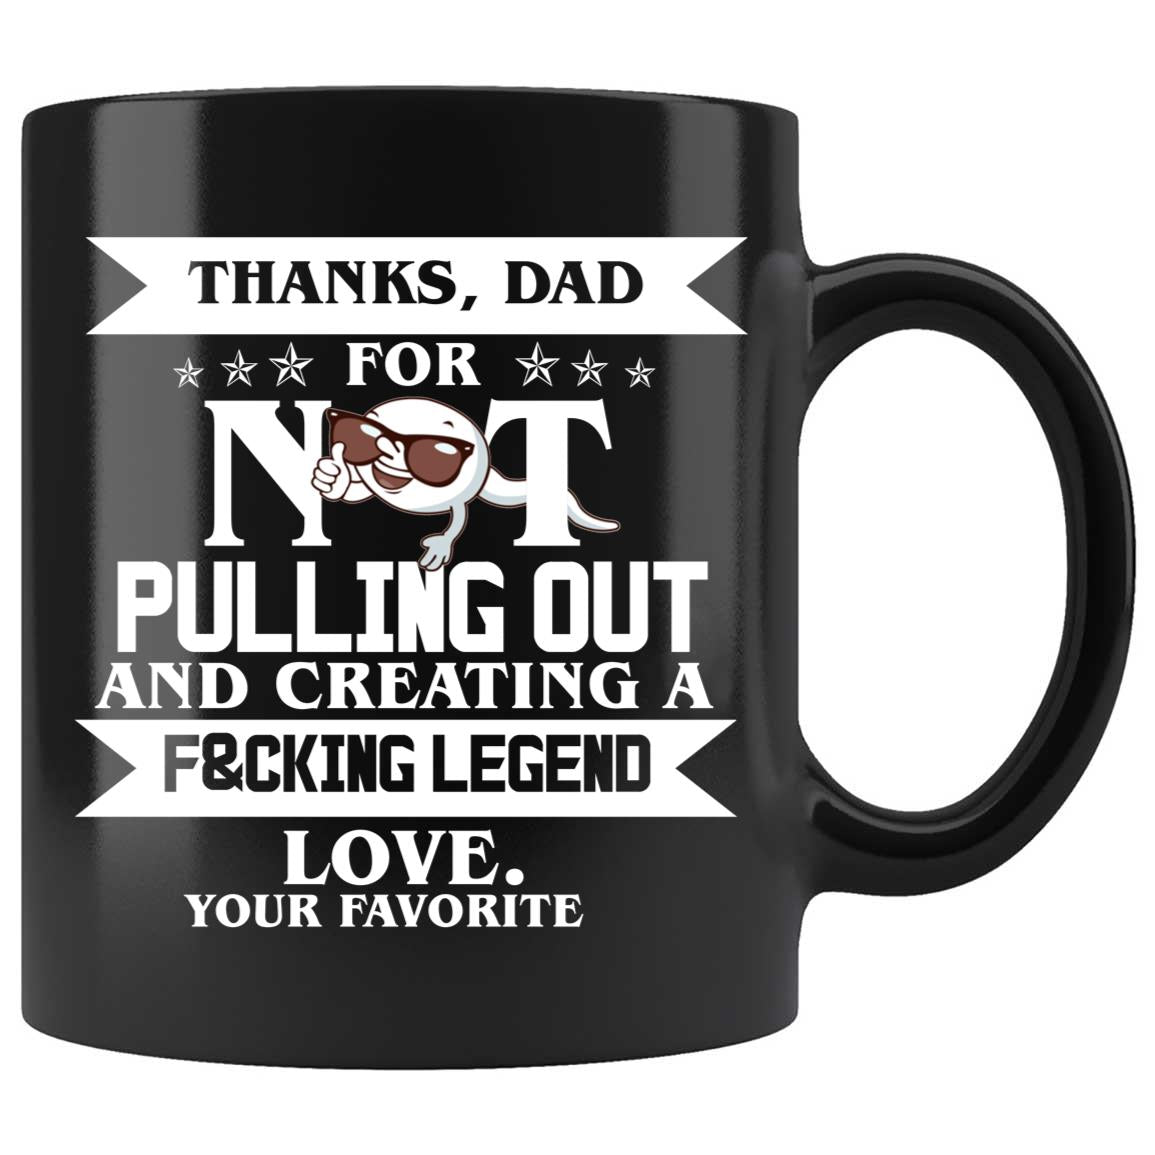 Skitongifts Coffee Mug Funny Ceramic Novelty M73-NH121221- Thank Dad For Not Pulling Out And Creating A Fu&King Legend Vlkn4Xn